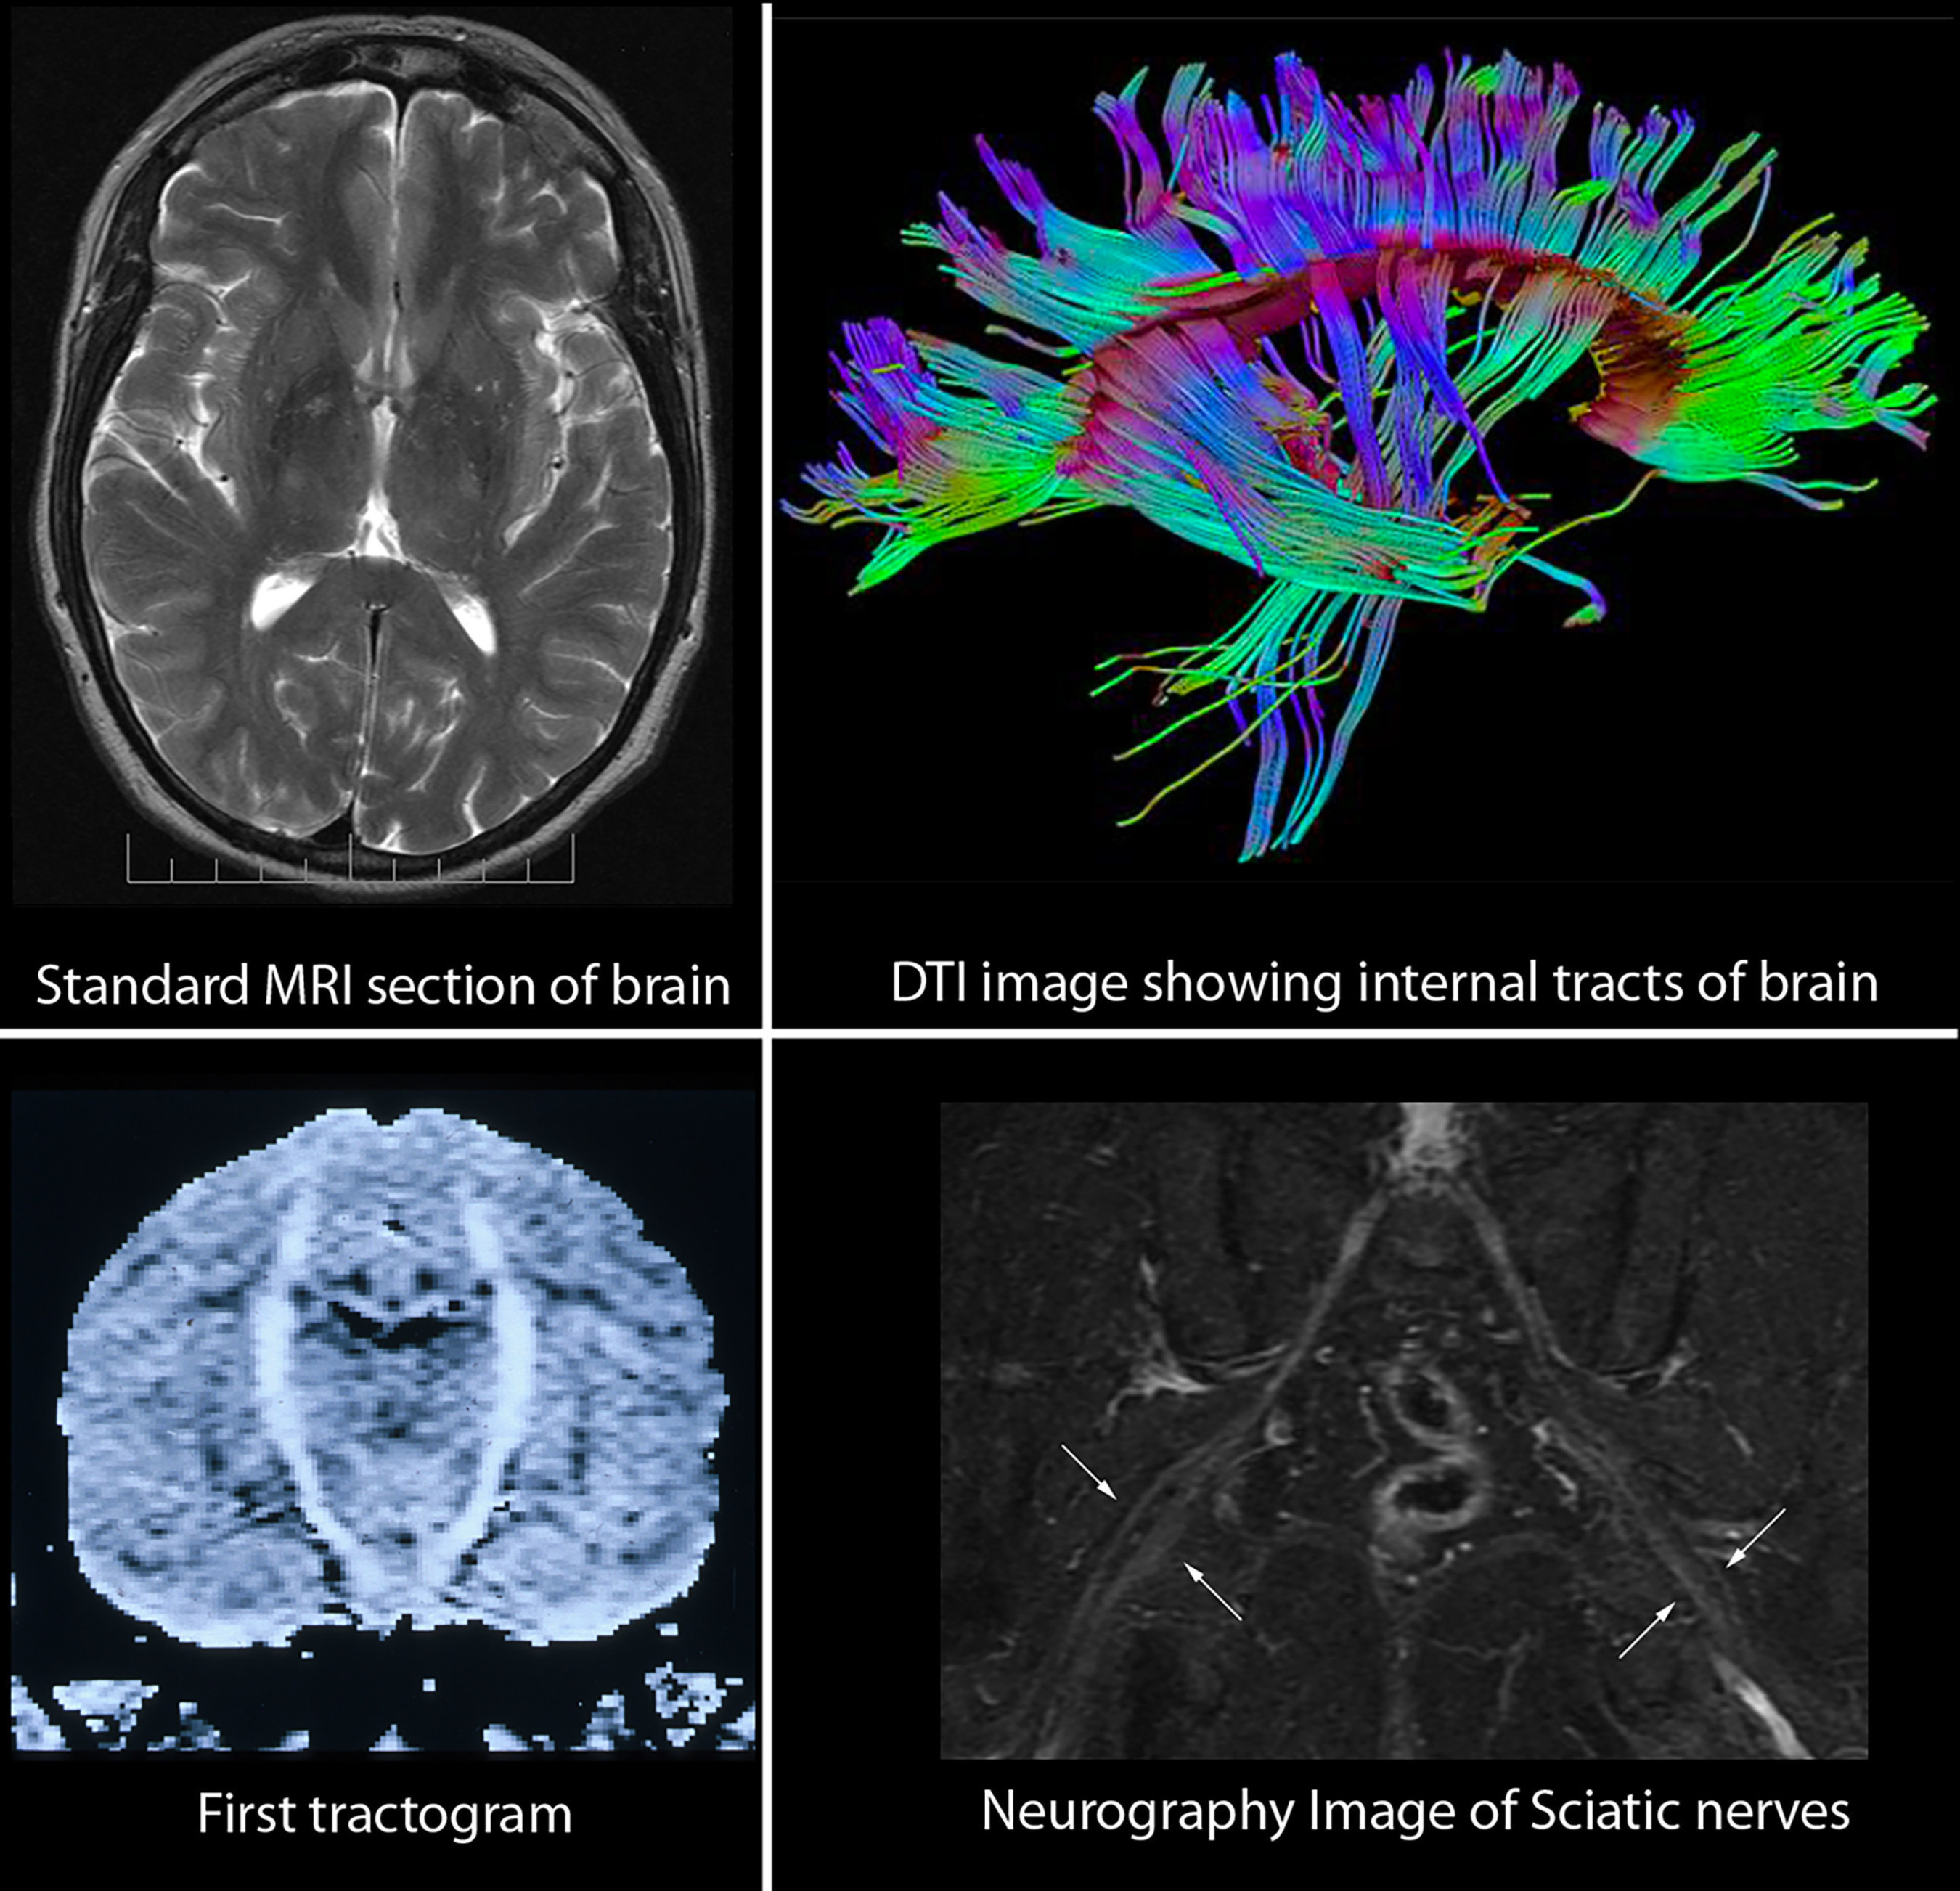 Comparison of standard brain MRI image with the three dimensional internal structure of the brain revealed by Diffusion Tensor Imaging (DTI). Brain injury from most impact sports, many civilian injuries, as well as those affecting war fighters are often invisible on standard MRI but are well seen on DTI. Dr. Aaron G. Filler was awarded the Pioneer in Medicine Award by the Society for Brain Mapping and Therapeutics for his invention of DTI.